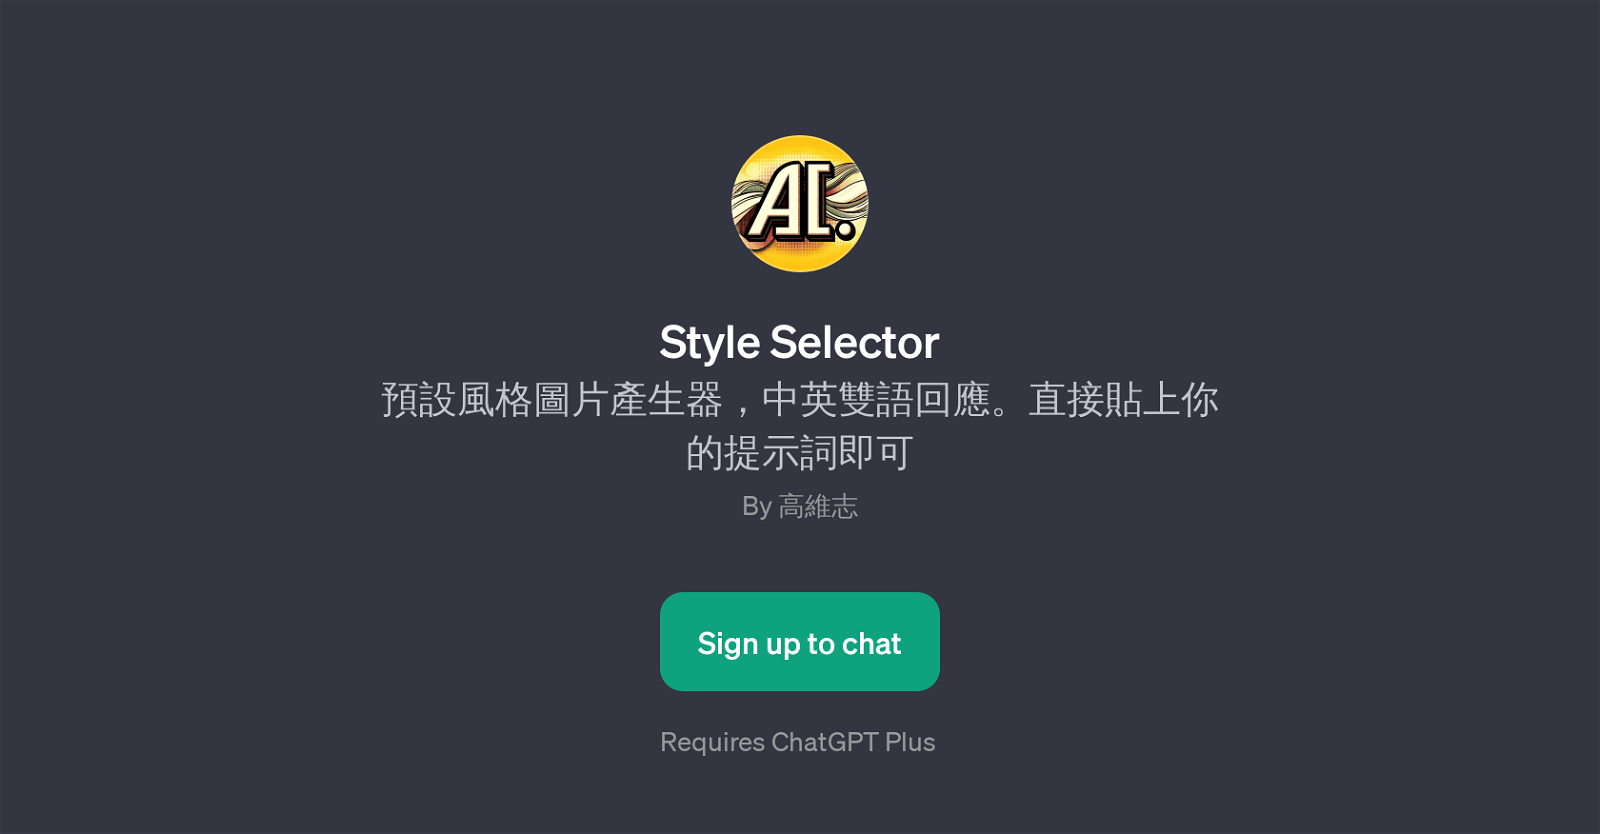 Style Selector website